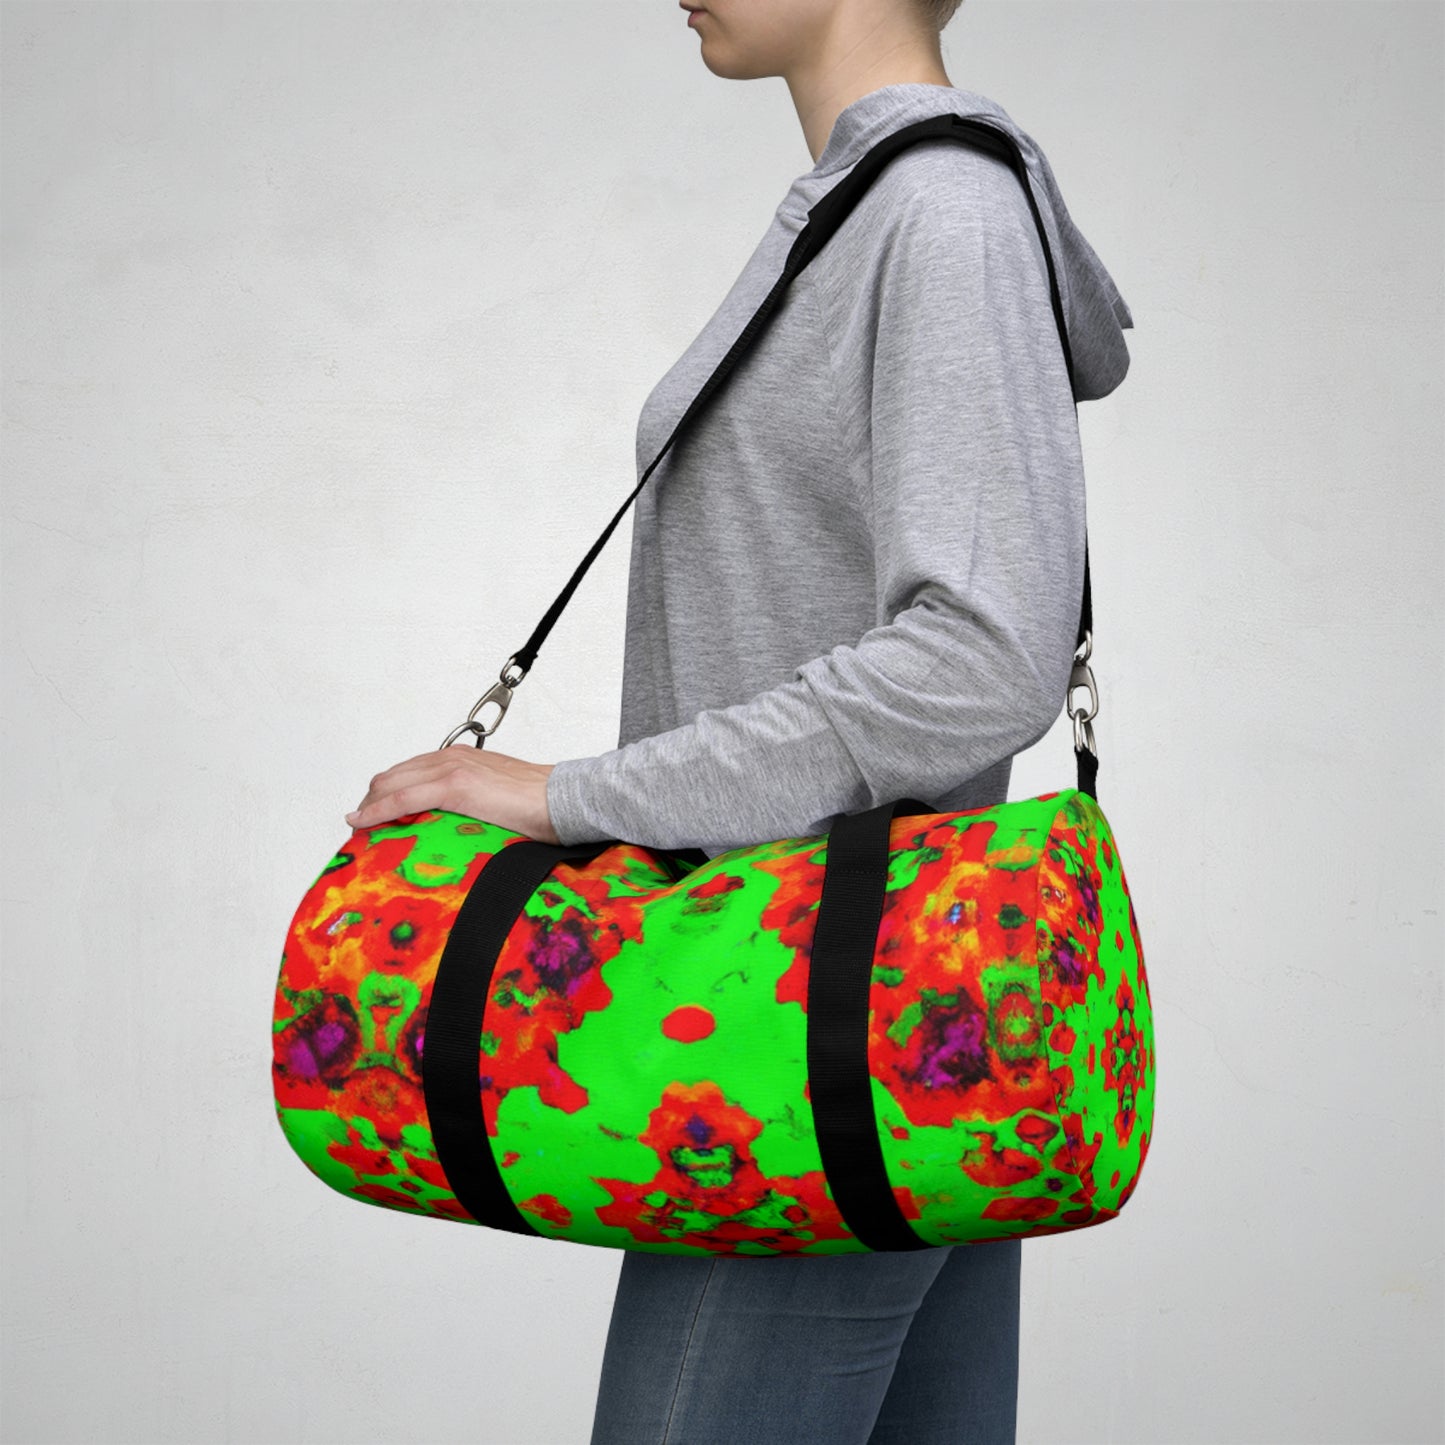 DeLuxe Avery - Psychedelic Duffel Bag